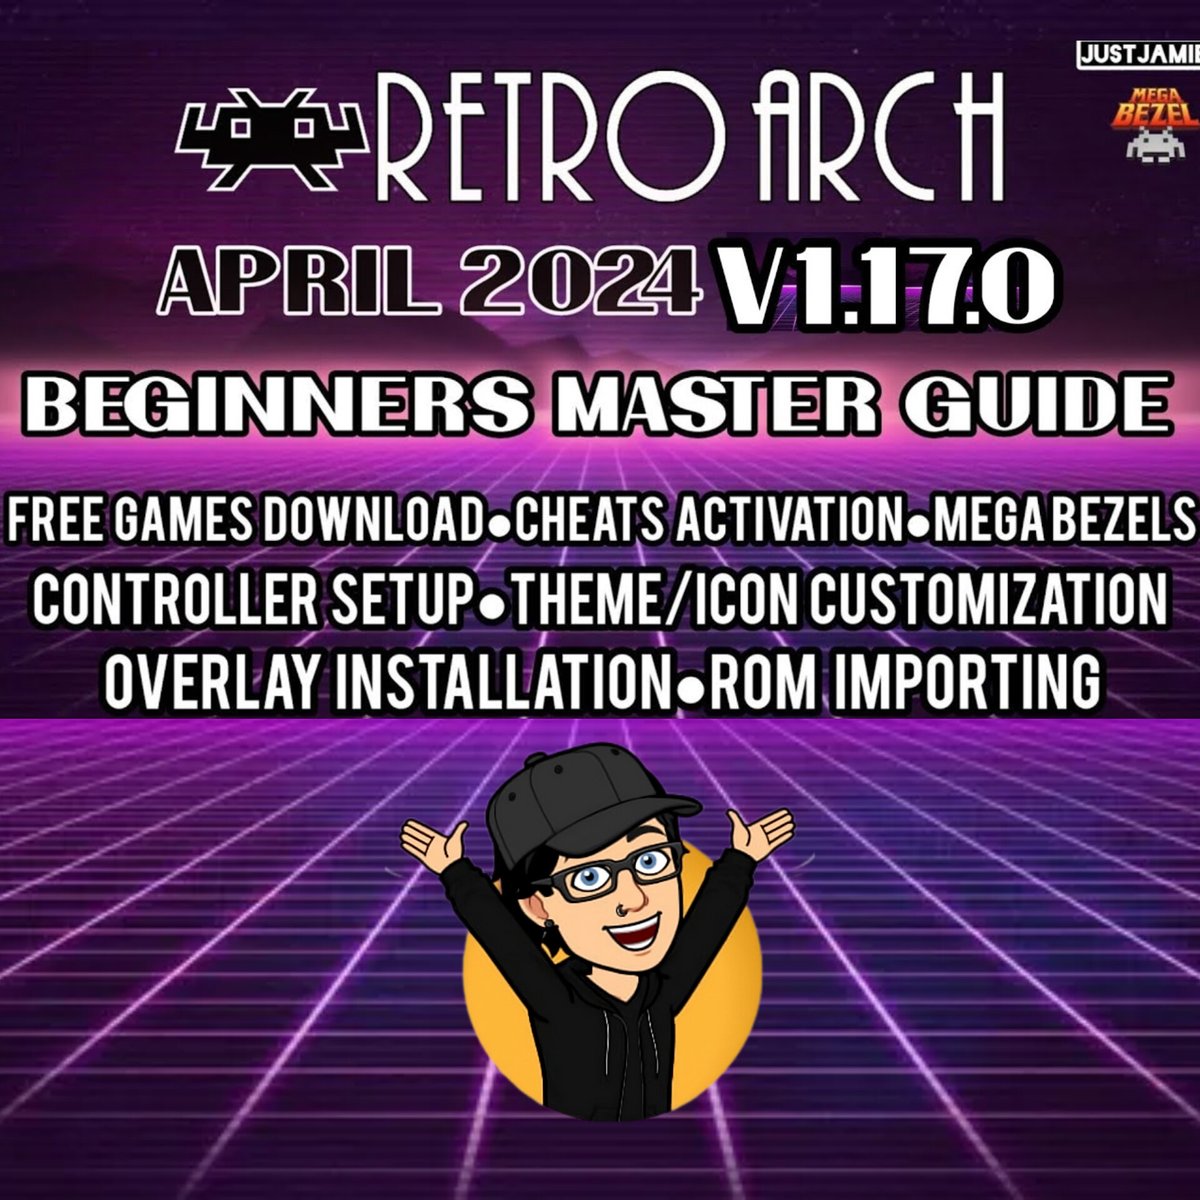 Anybody out there struggling with Retroarch? This is the easiest and most slow paced guide out there. Turn Retroarch into a full-blown beautiful-looking emulation system. youtu.be/9EOy_g7snIw #retroarch #frontend #emulator #justjamie